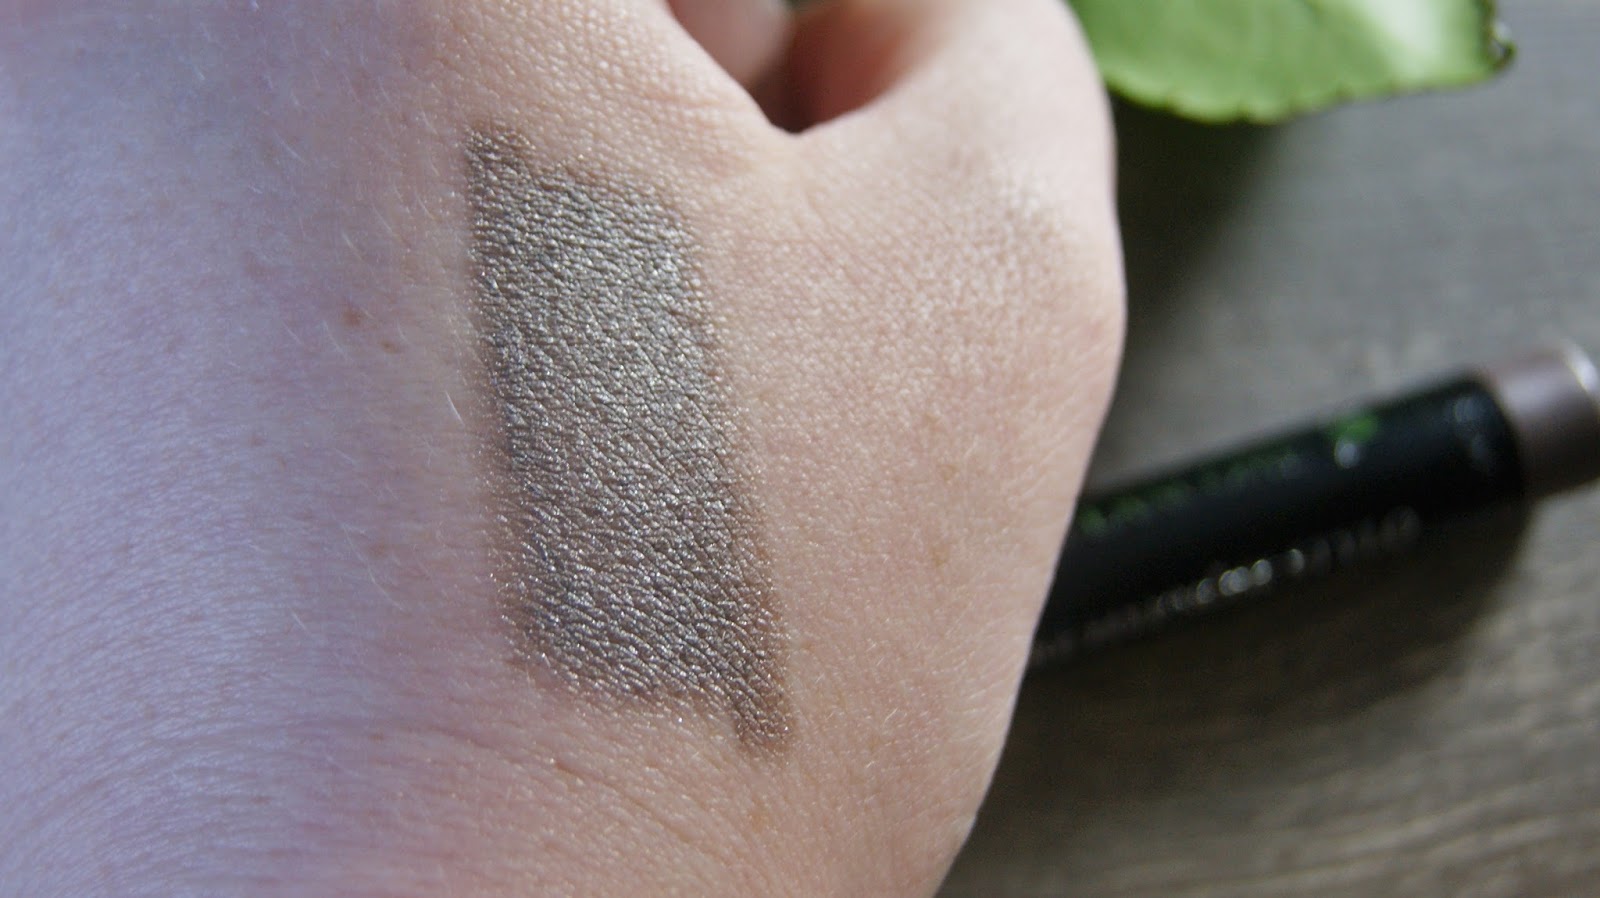 LANCOME OMBRE HYPNOSE STYLO EYESHADOW STICK IN TAUPE QUARTZ - A Life Frills